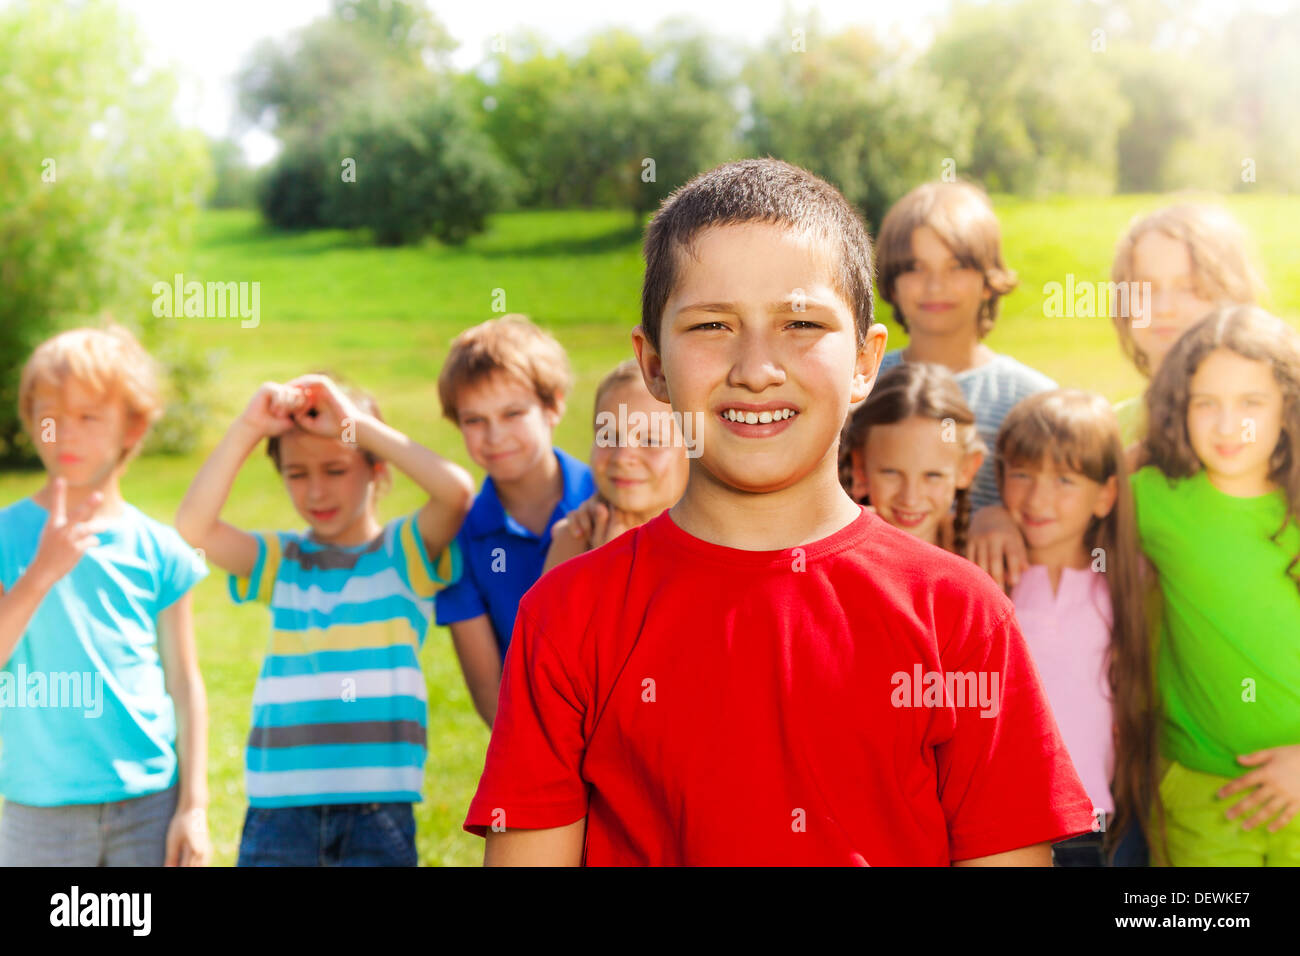 Happy group of people and close portrait one Asian boy in red shirt Stock Photo